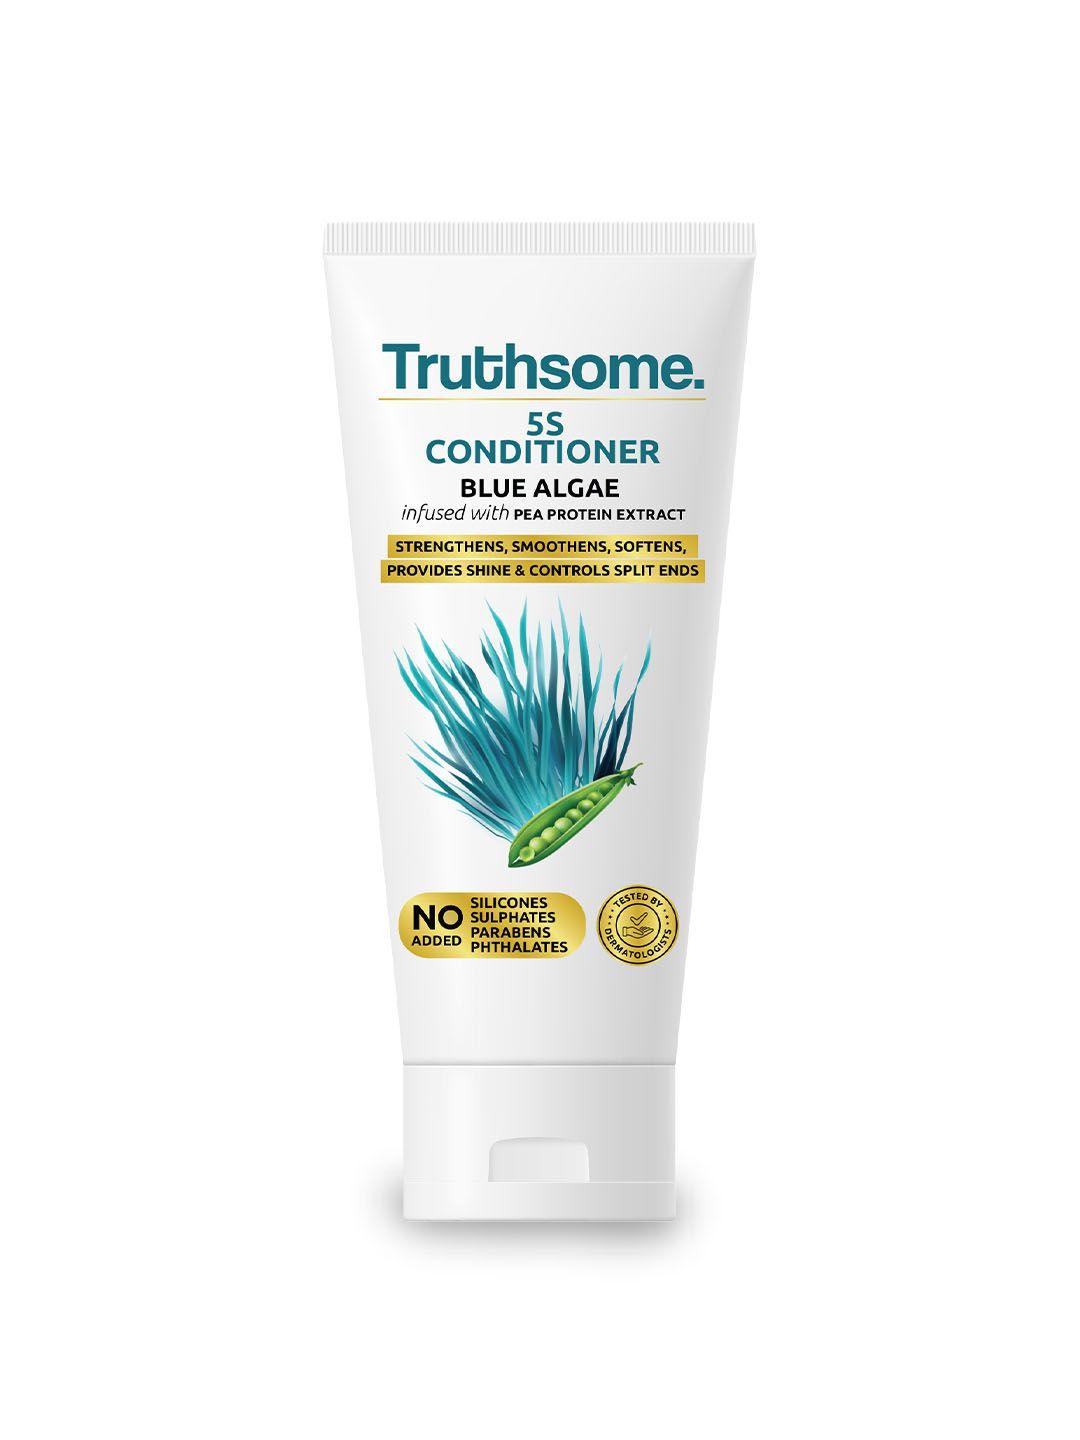 truthsome. 5s blue algae conditioner to control split ends & provide shiny hair - 150 ml